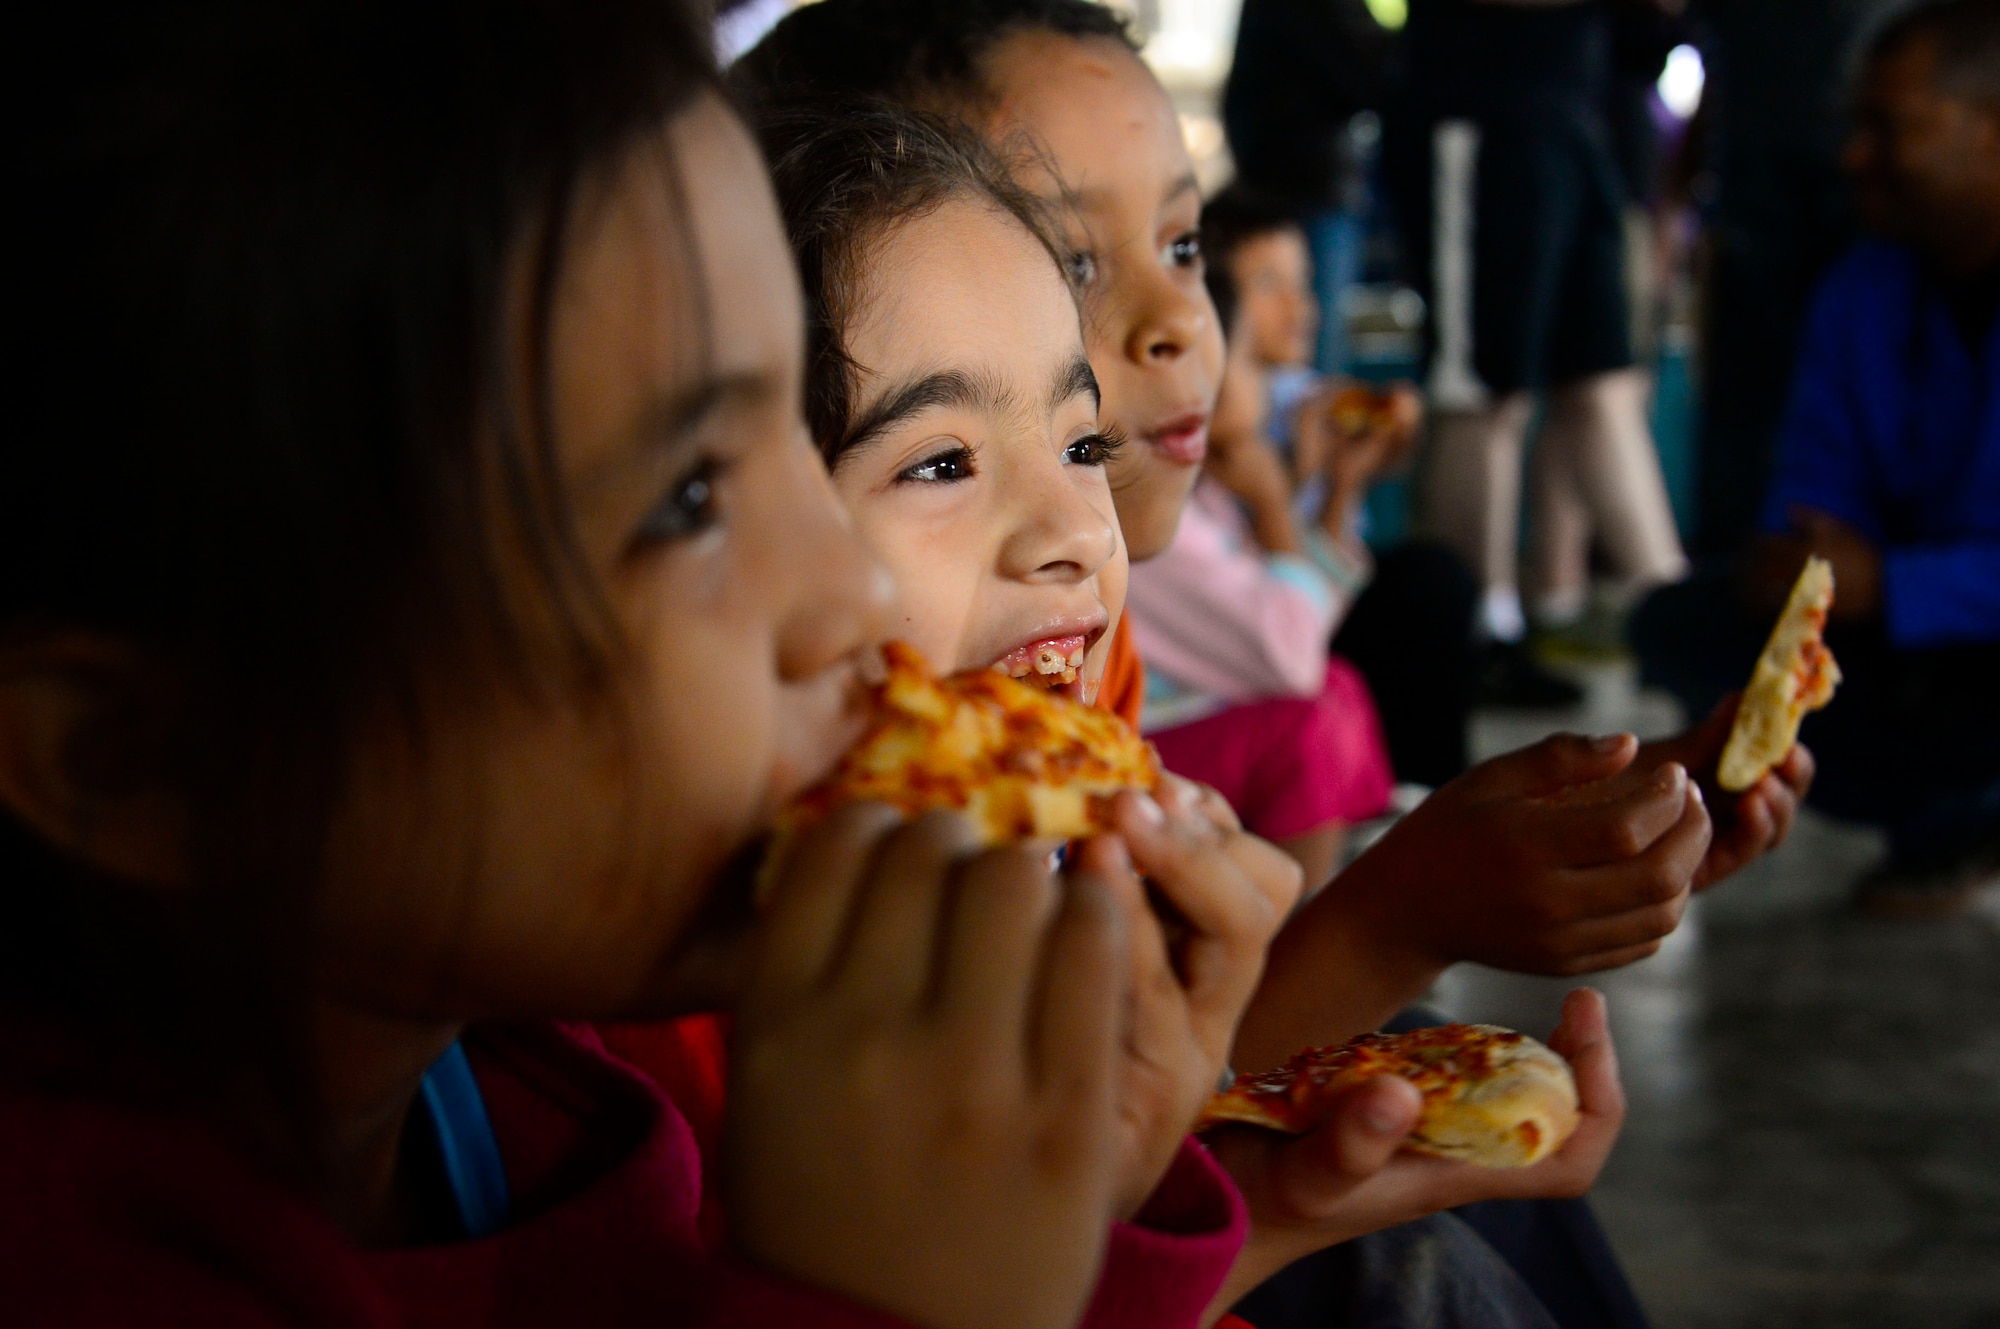 A group of children enjoy their pizza dinner during Joint Task Force-Bravo’s visit to at the Sisters of Charity Orphanage in Comayagua, Honduras, Jan. 25, 2015. The Sisters of Charity Orphanage is one of seven different orphanages from around the Comayagua Valley that the U.S. military personnel assigned to JTF-Bravo have supported over the past 17 years. In addition to spending time with interacting with children, members have also collected and donated much-needed supplies and food, as well as helped in minor construction work on the buildings in which the children live. (U.S. Air Force photo/Tech. Sgt. Heather Redman)